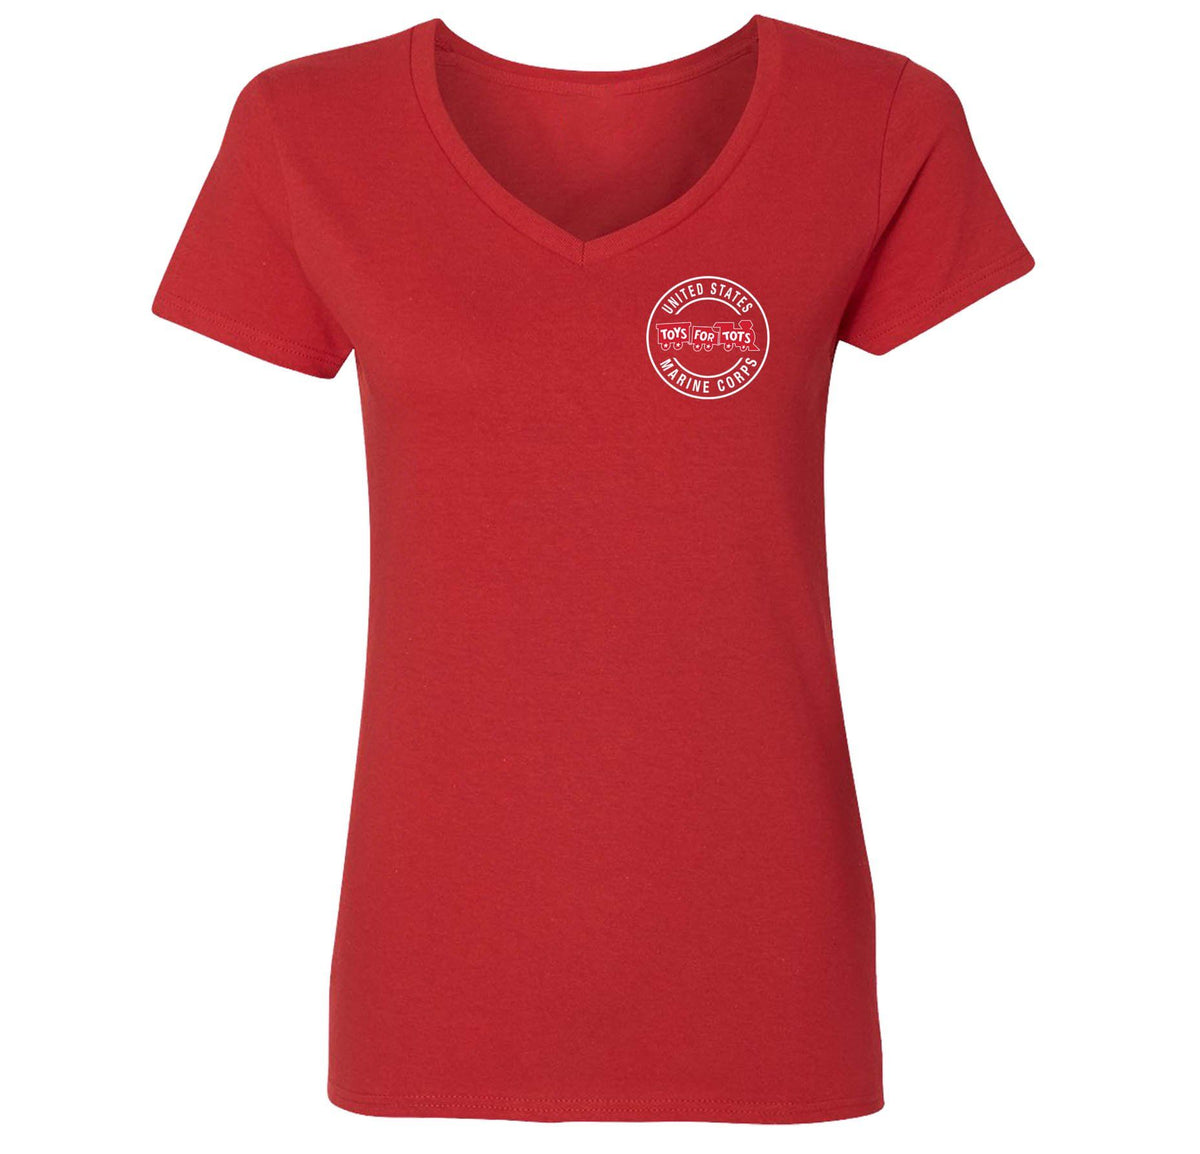 Circle TFT Chest Seal Women's V-Neck TFT Shirt Marine Corps Direct S RED 